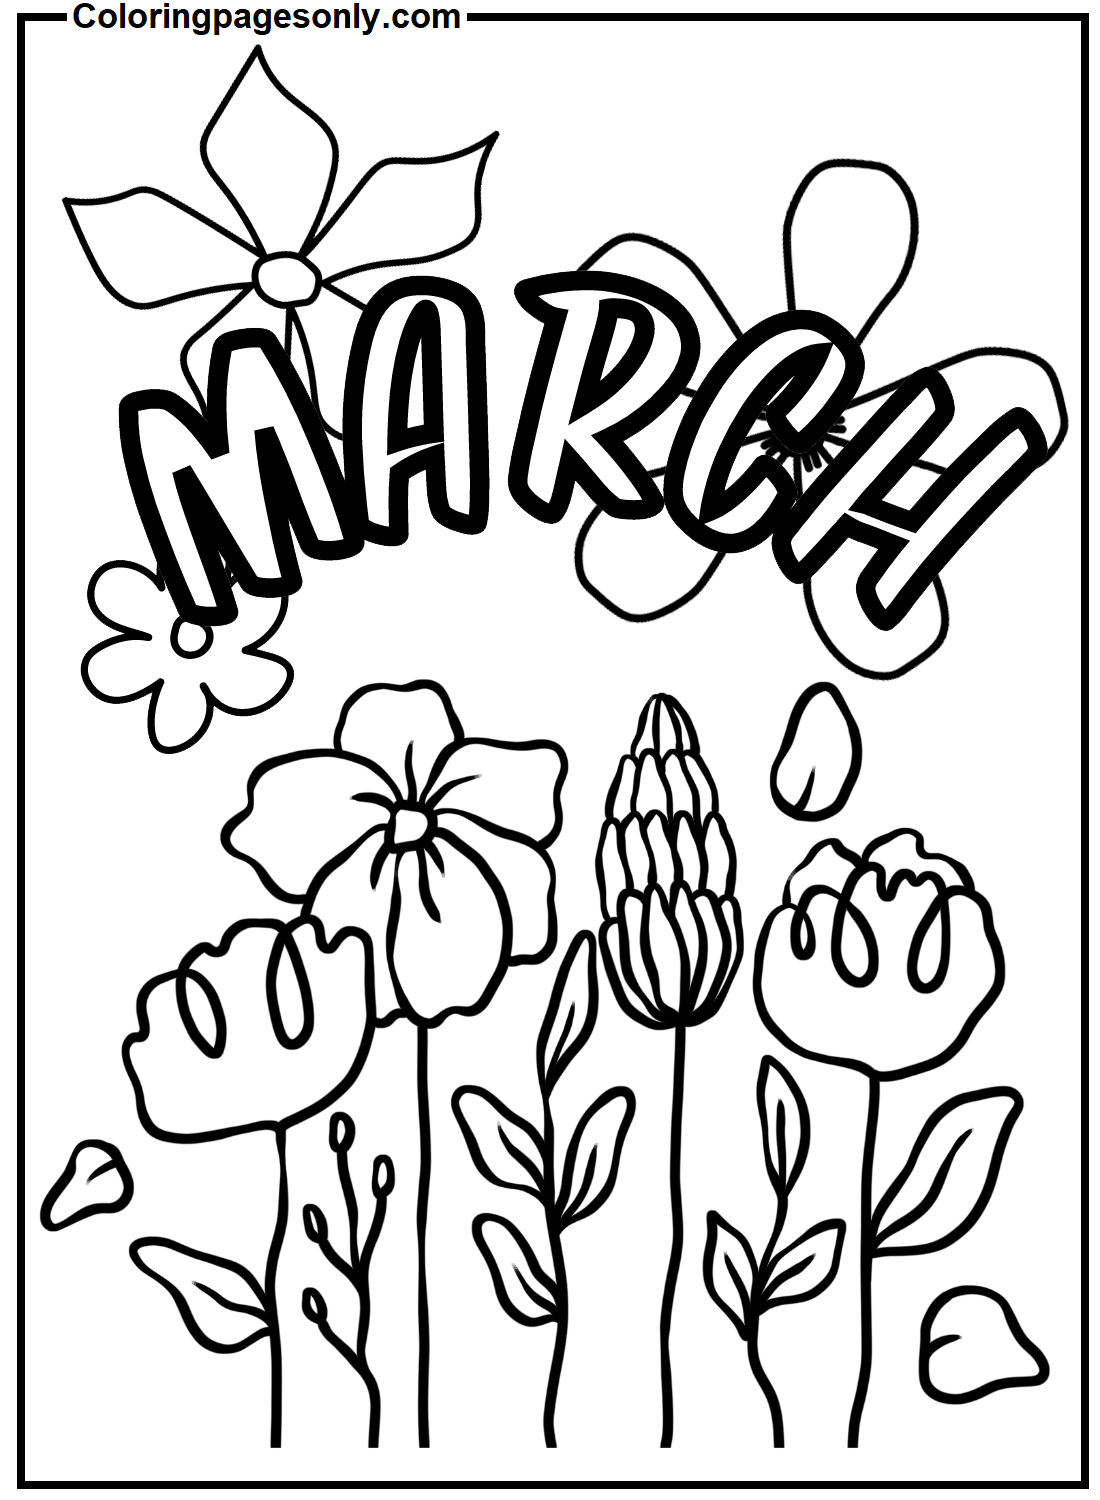 Month March Coloring Page